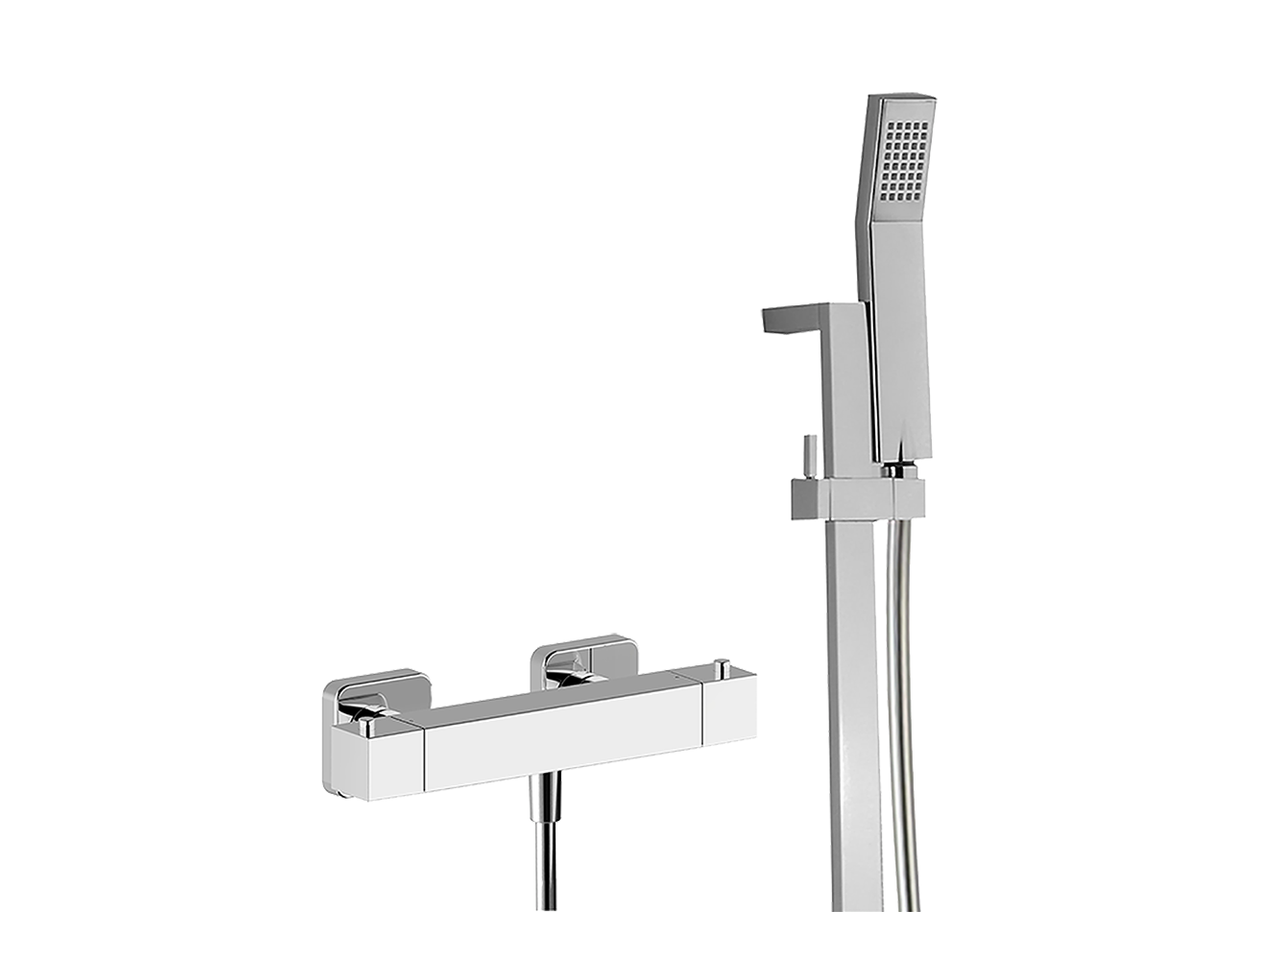 CisalThermostatic shower mixer with sliding bar ROADSTER ACCENT_RAS01010